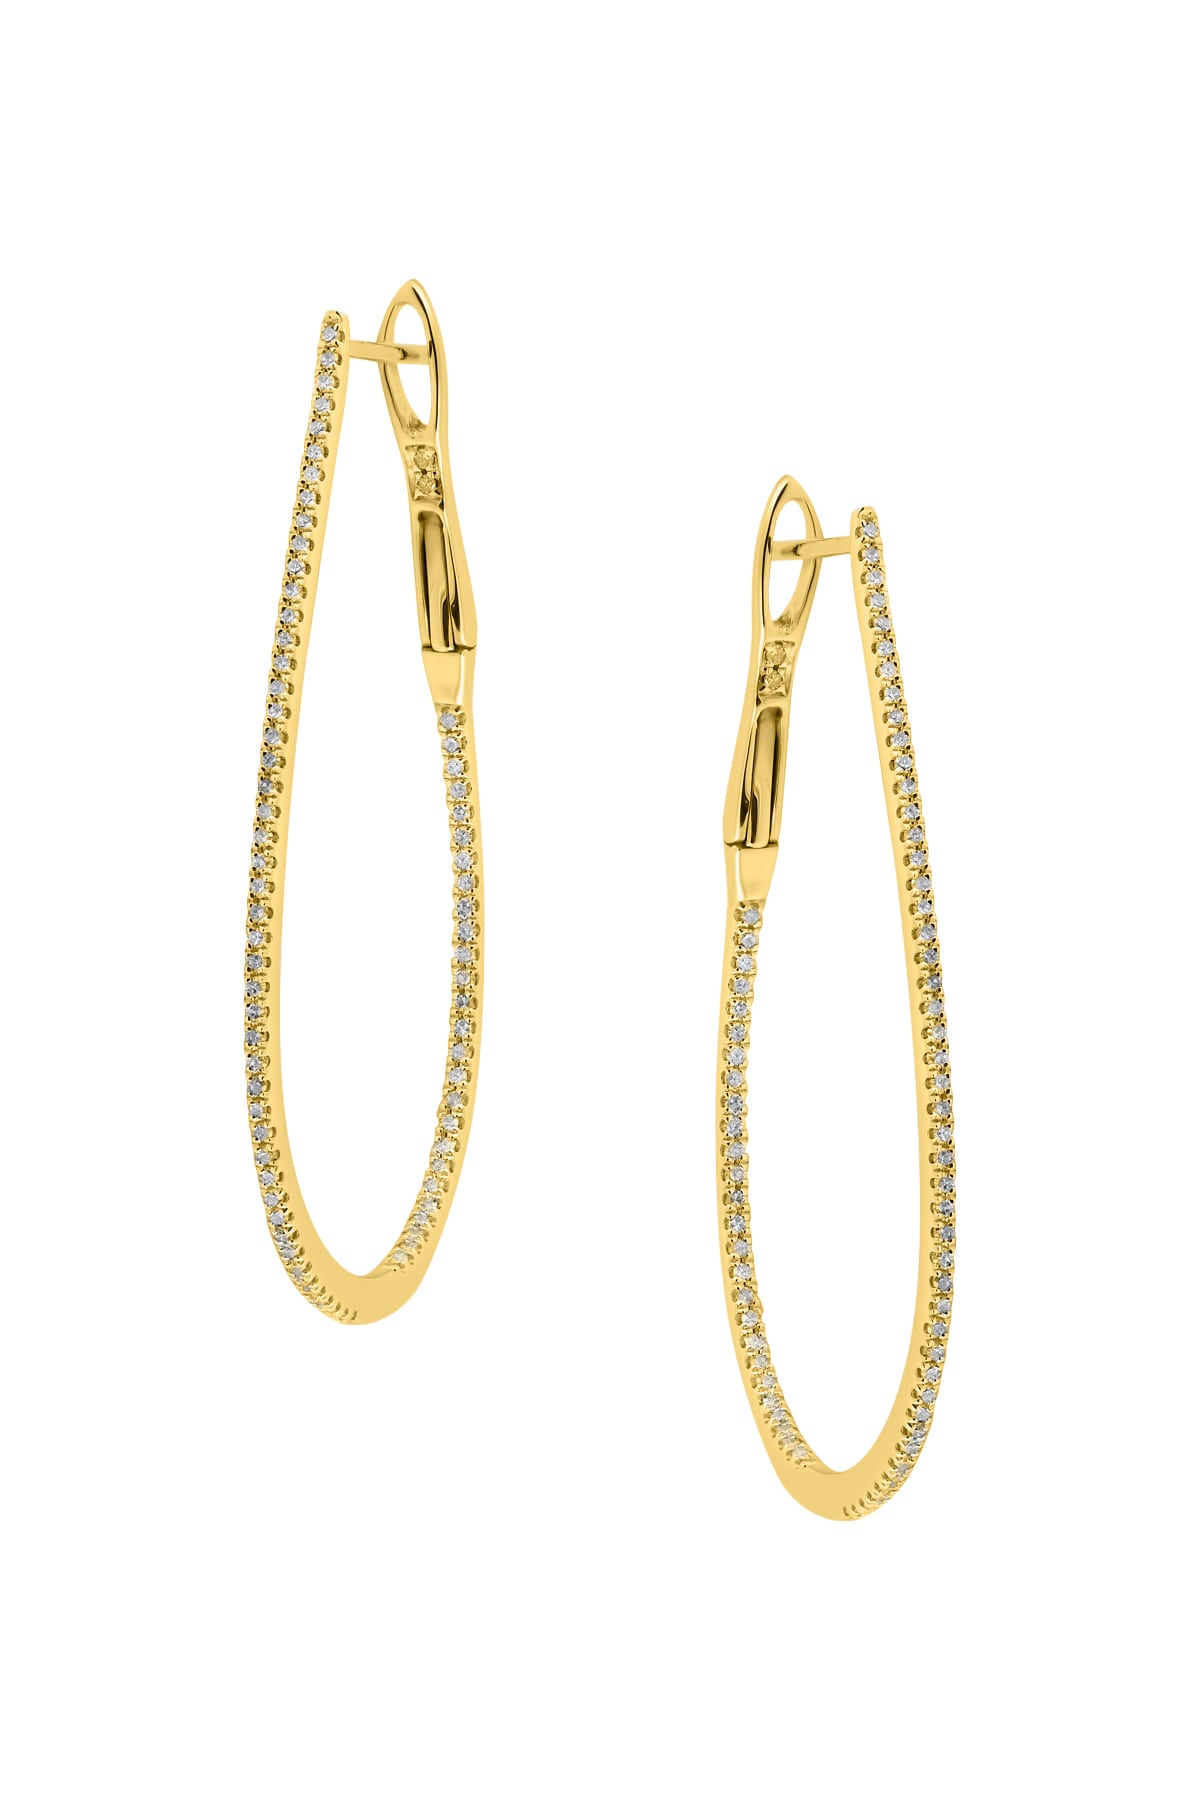 Large Oval In And Out Hoop Earrings In Yellow Gold from LeGassick.